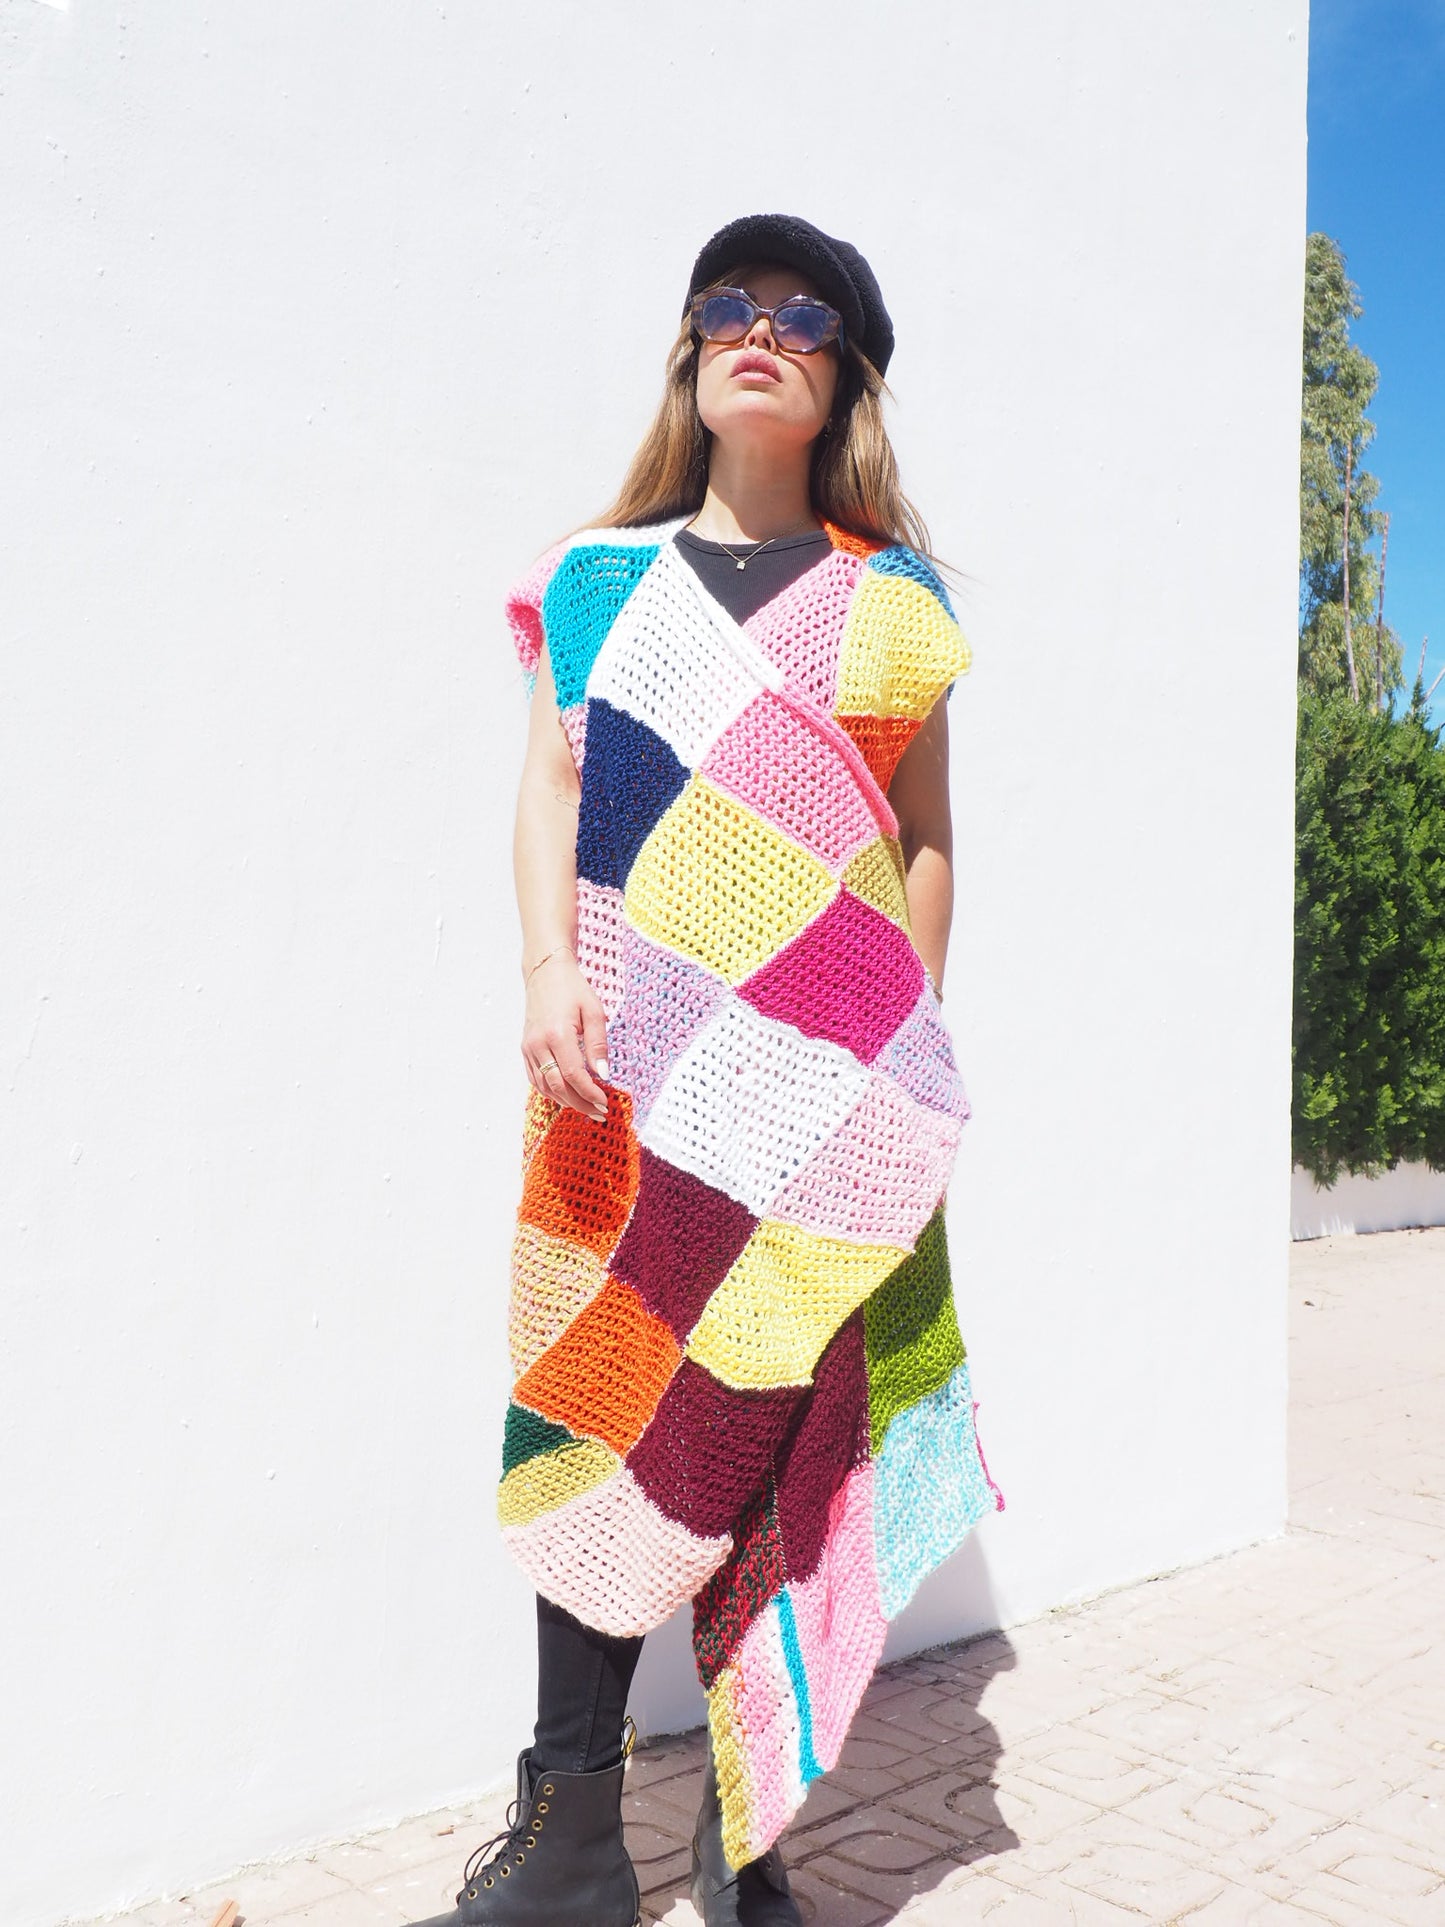 Very colourful handmade vintage crochet waistcoat by up-cycled by Vagabond Ibiza.